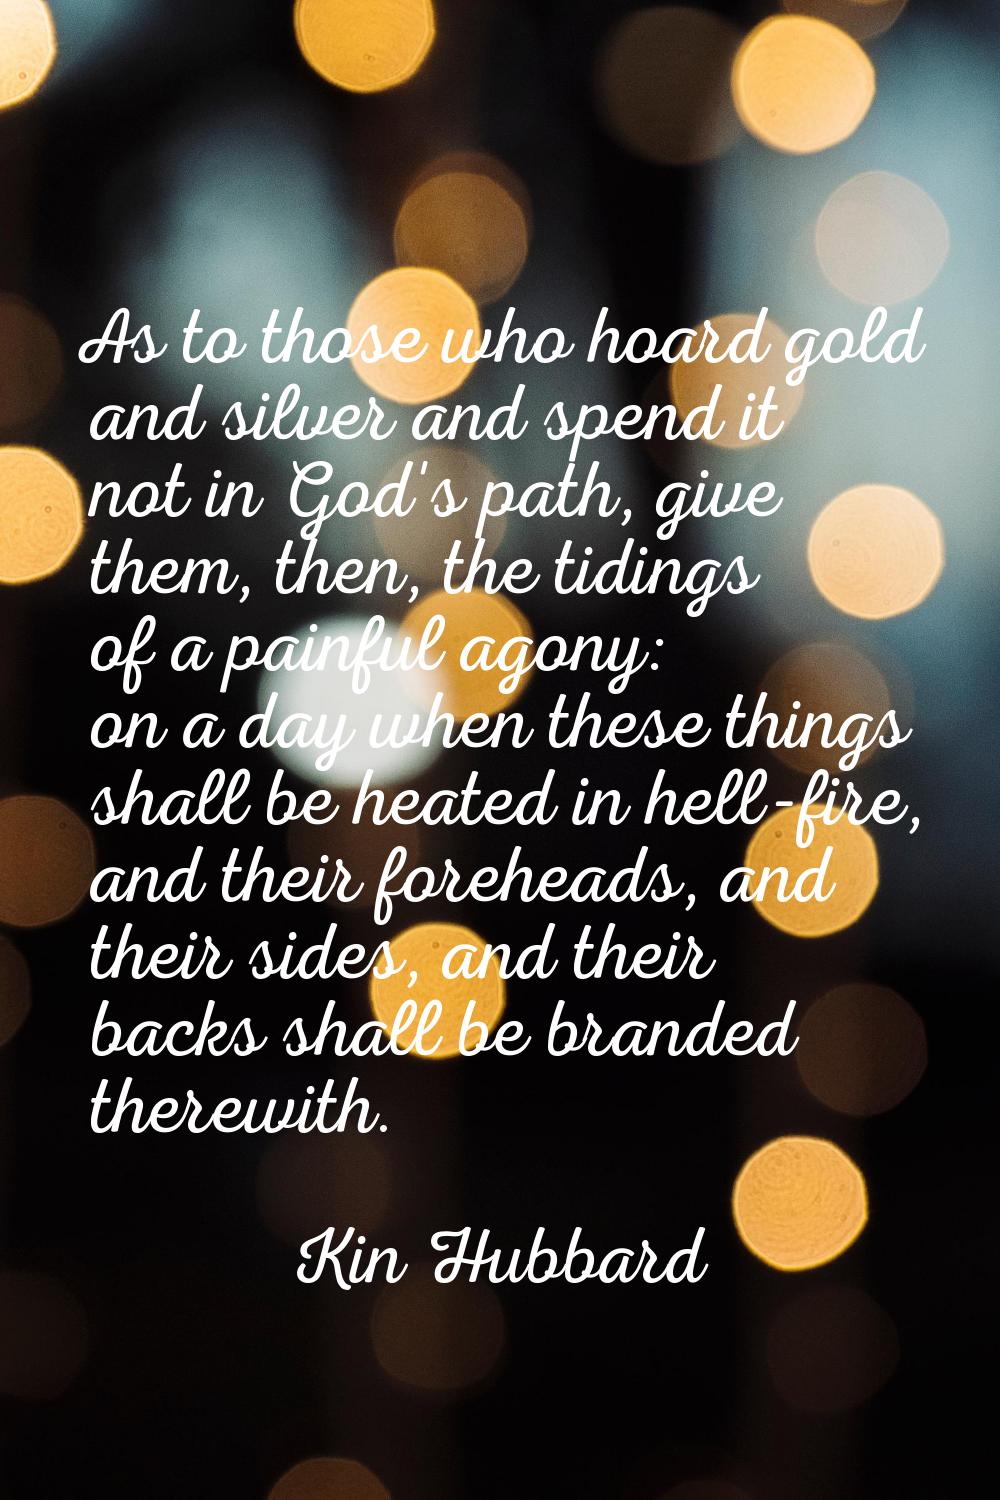 As to those who hoard gold and silver and spend it not in God's path, give them, then, the tidings 